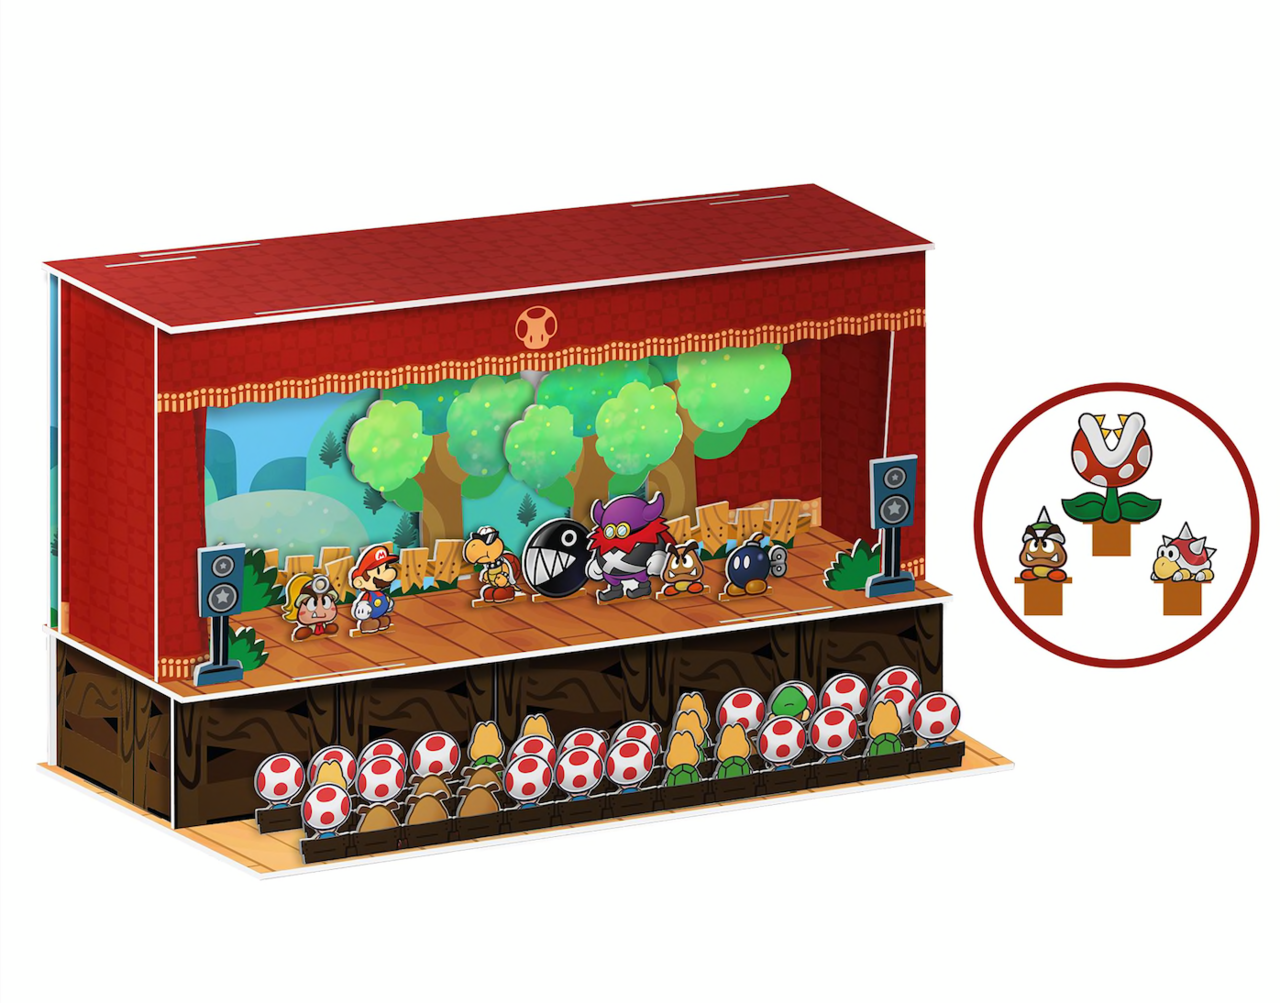 So far, this special battle diorama is only available as a bundle with Paper Mario: The Thousand-Year Door in the UK.